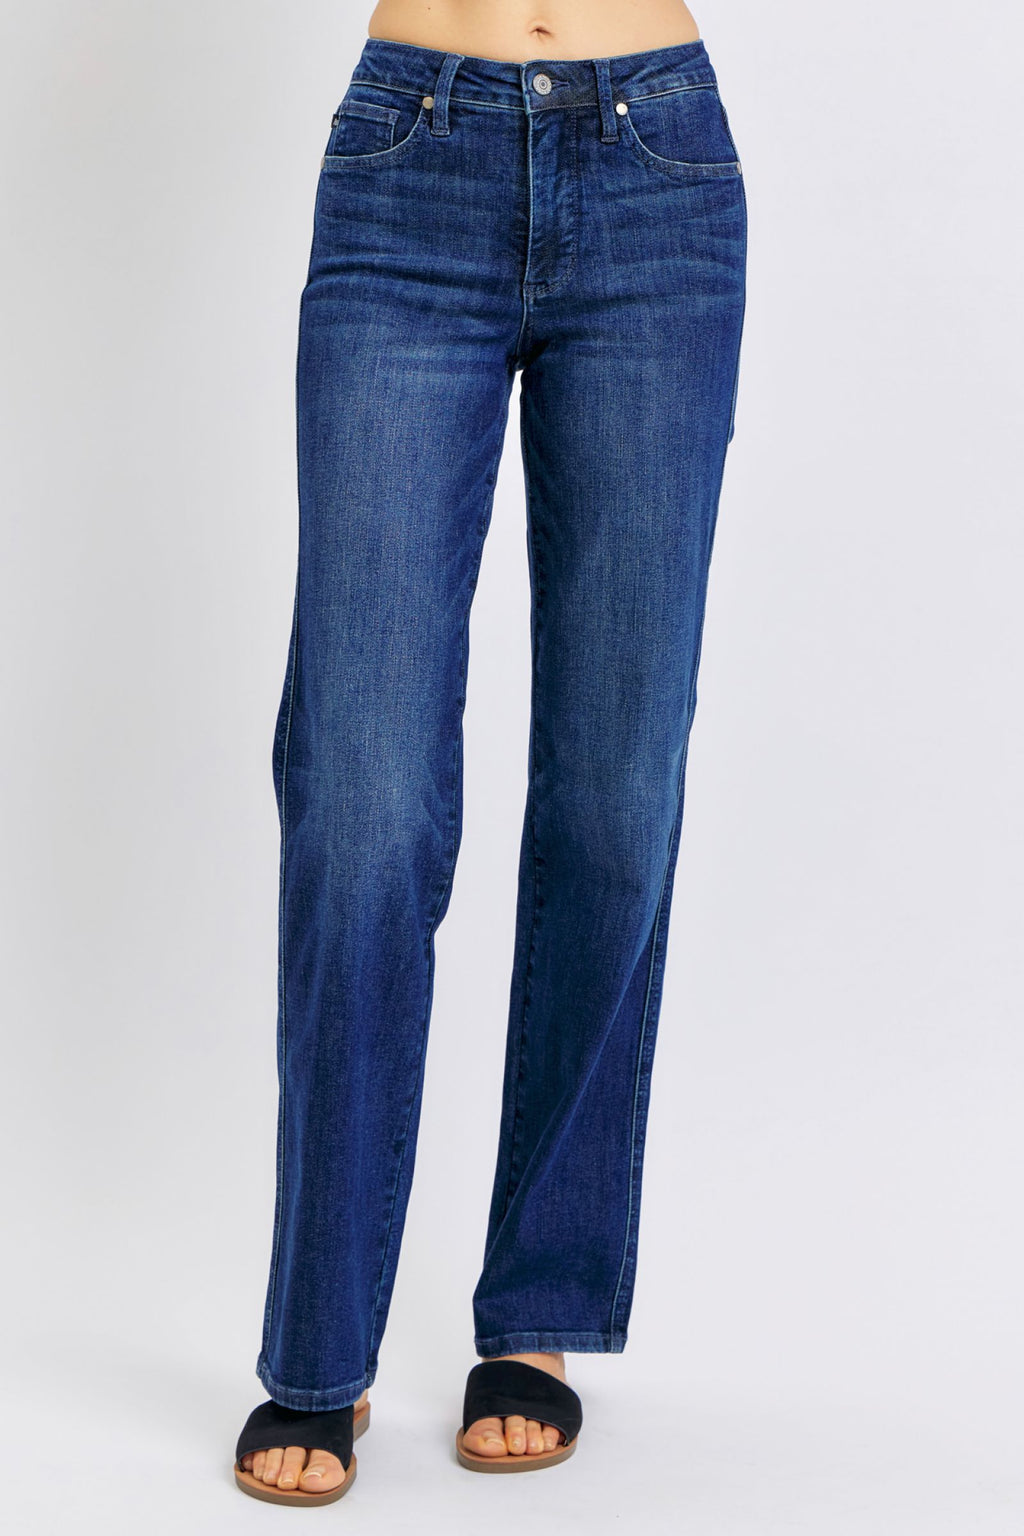 JUDY BLUE MID RISE TUMMY CONTROL CLASSIC STRAIGHT JEANS